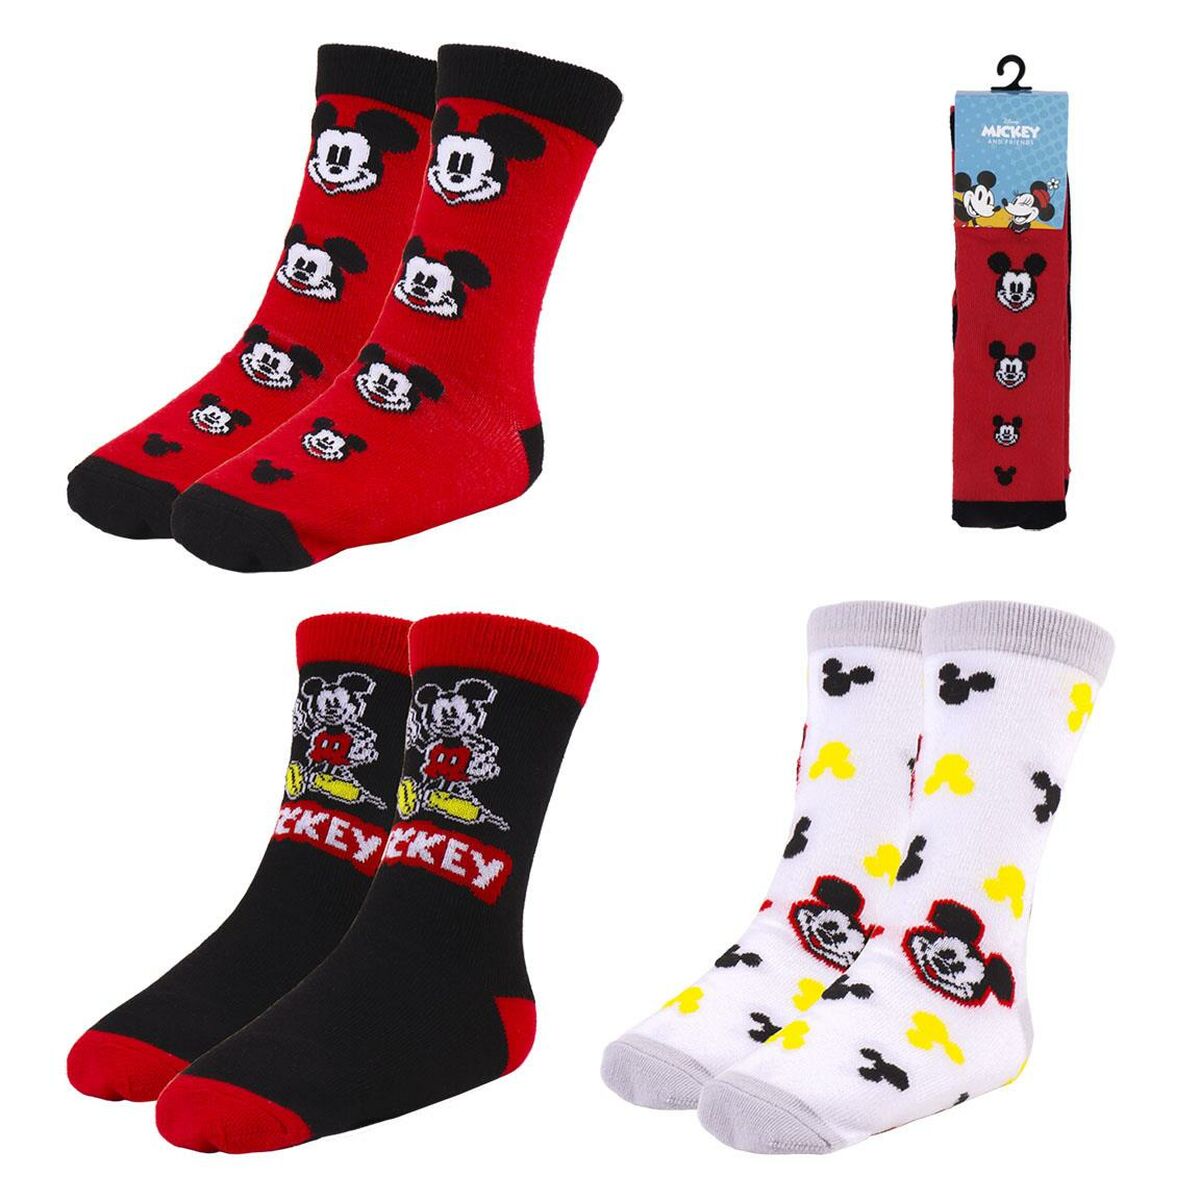 Chaussettes Mickey Mouse 3 paires Multicouleur